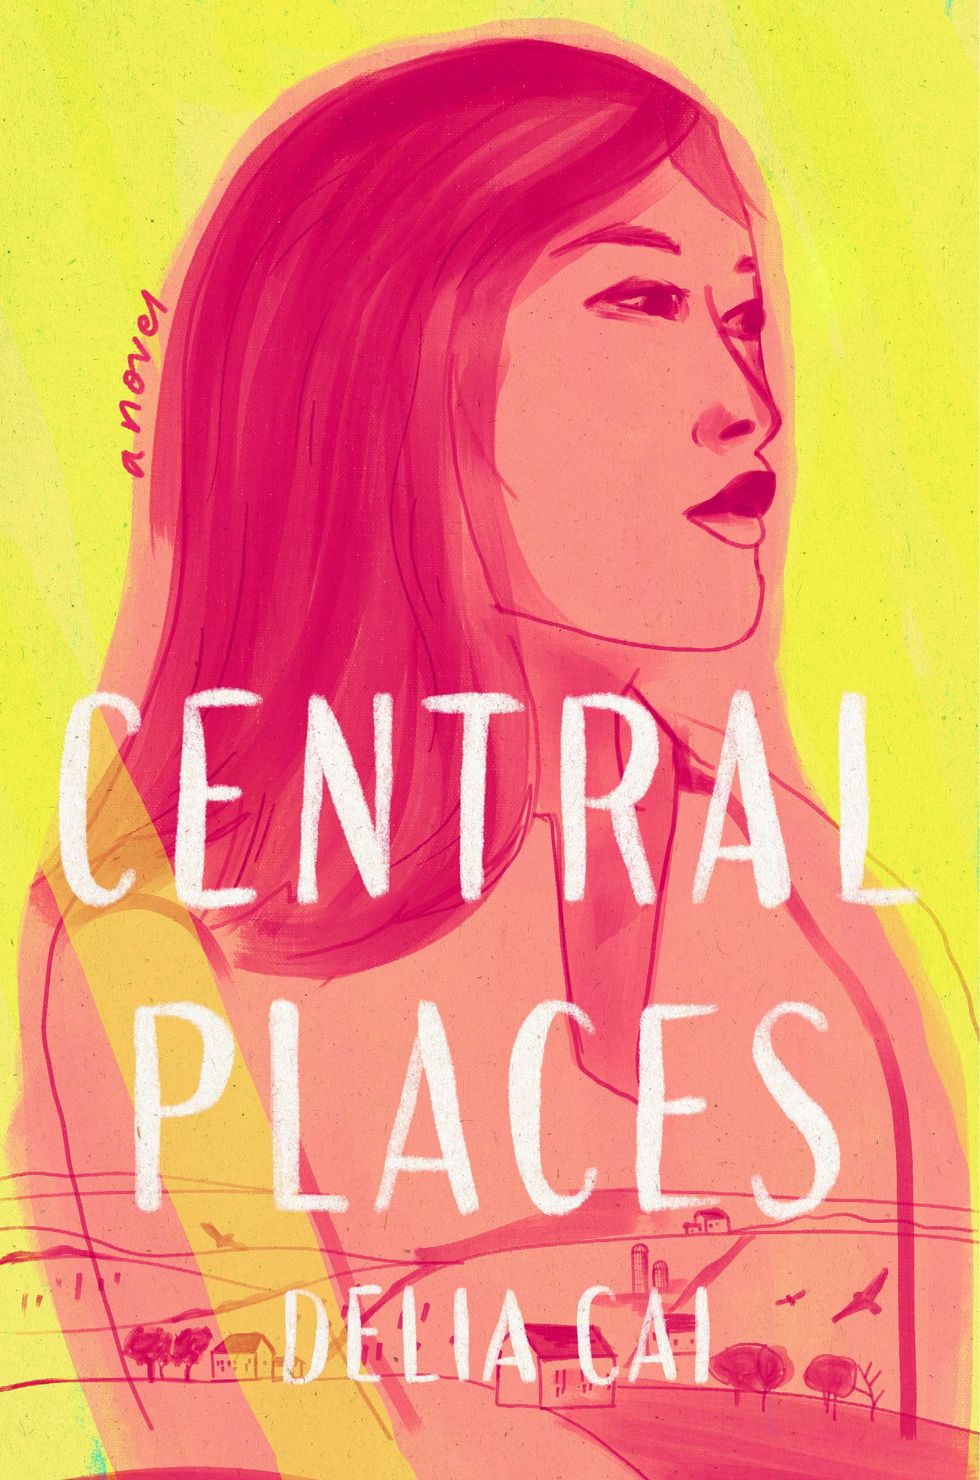 <i>Central Places</i> by Delia Cai